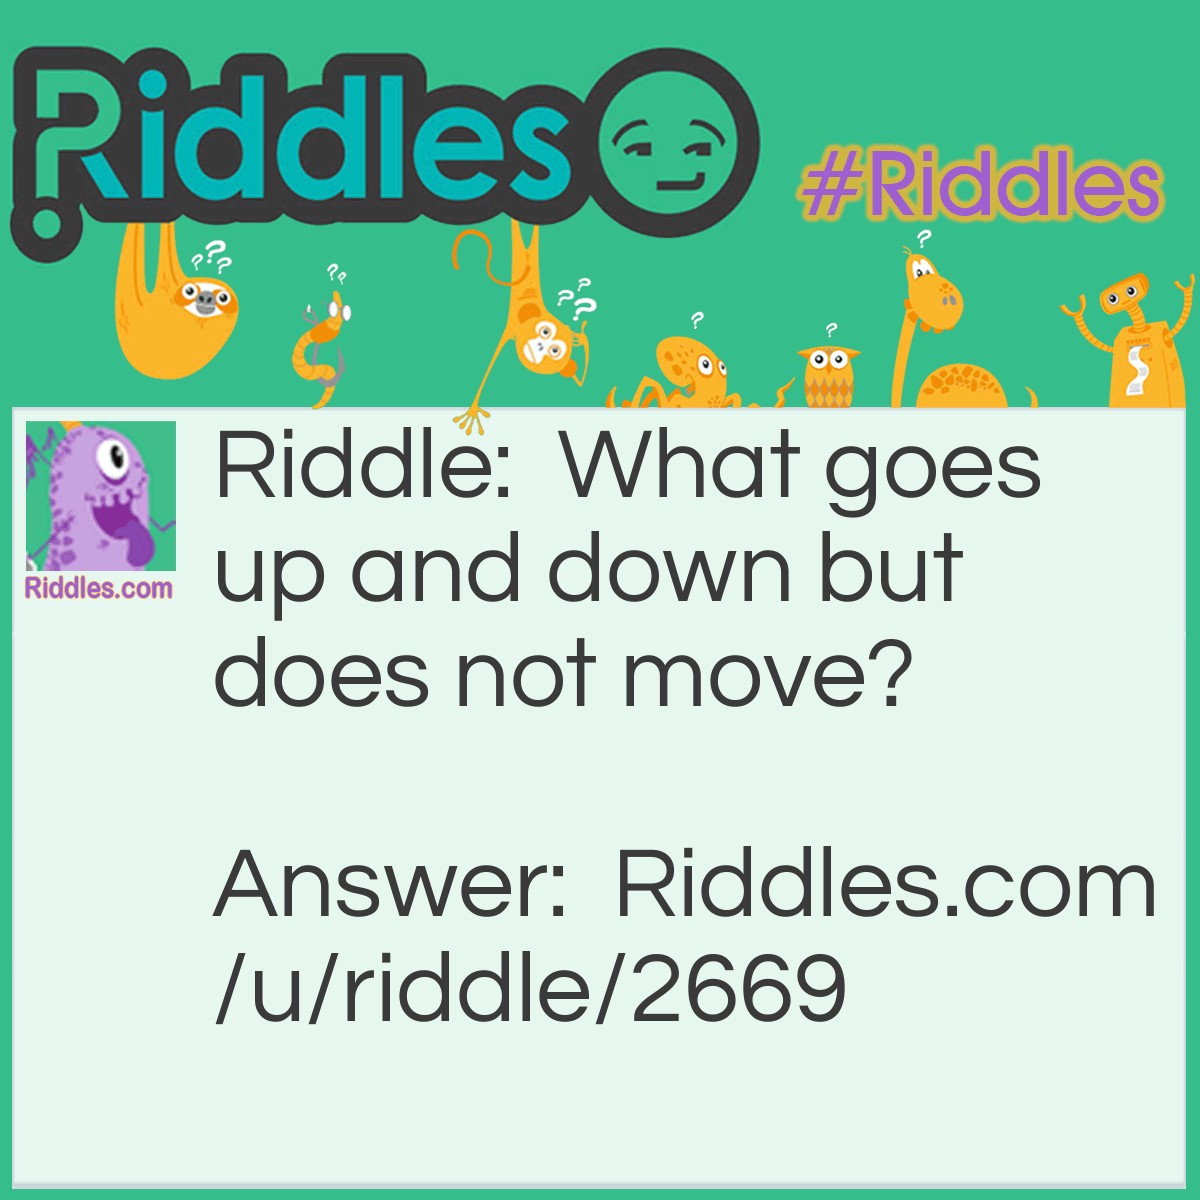 Riddle: What goes up and down but does not move? Answer: Stairs.